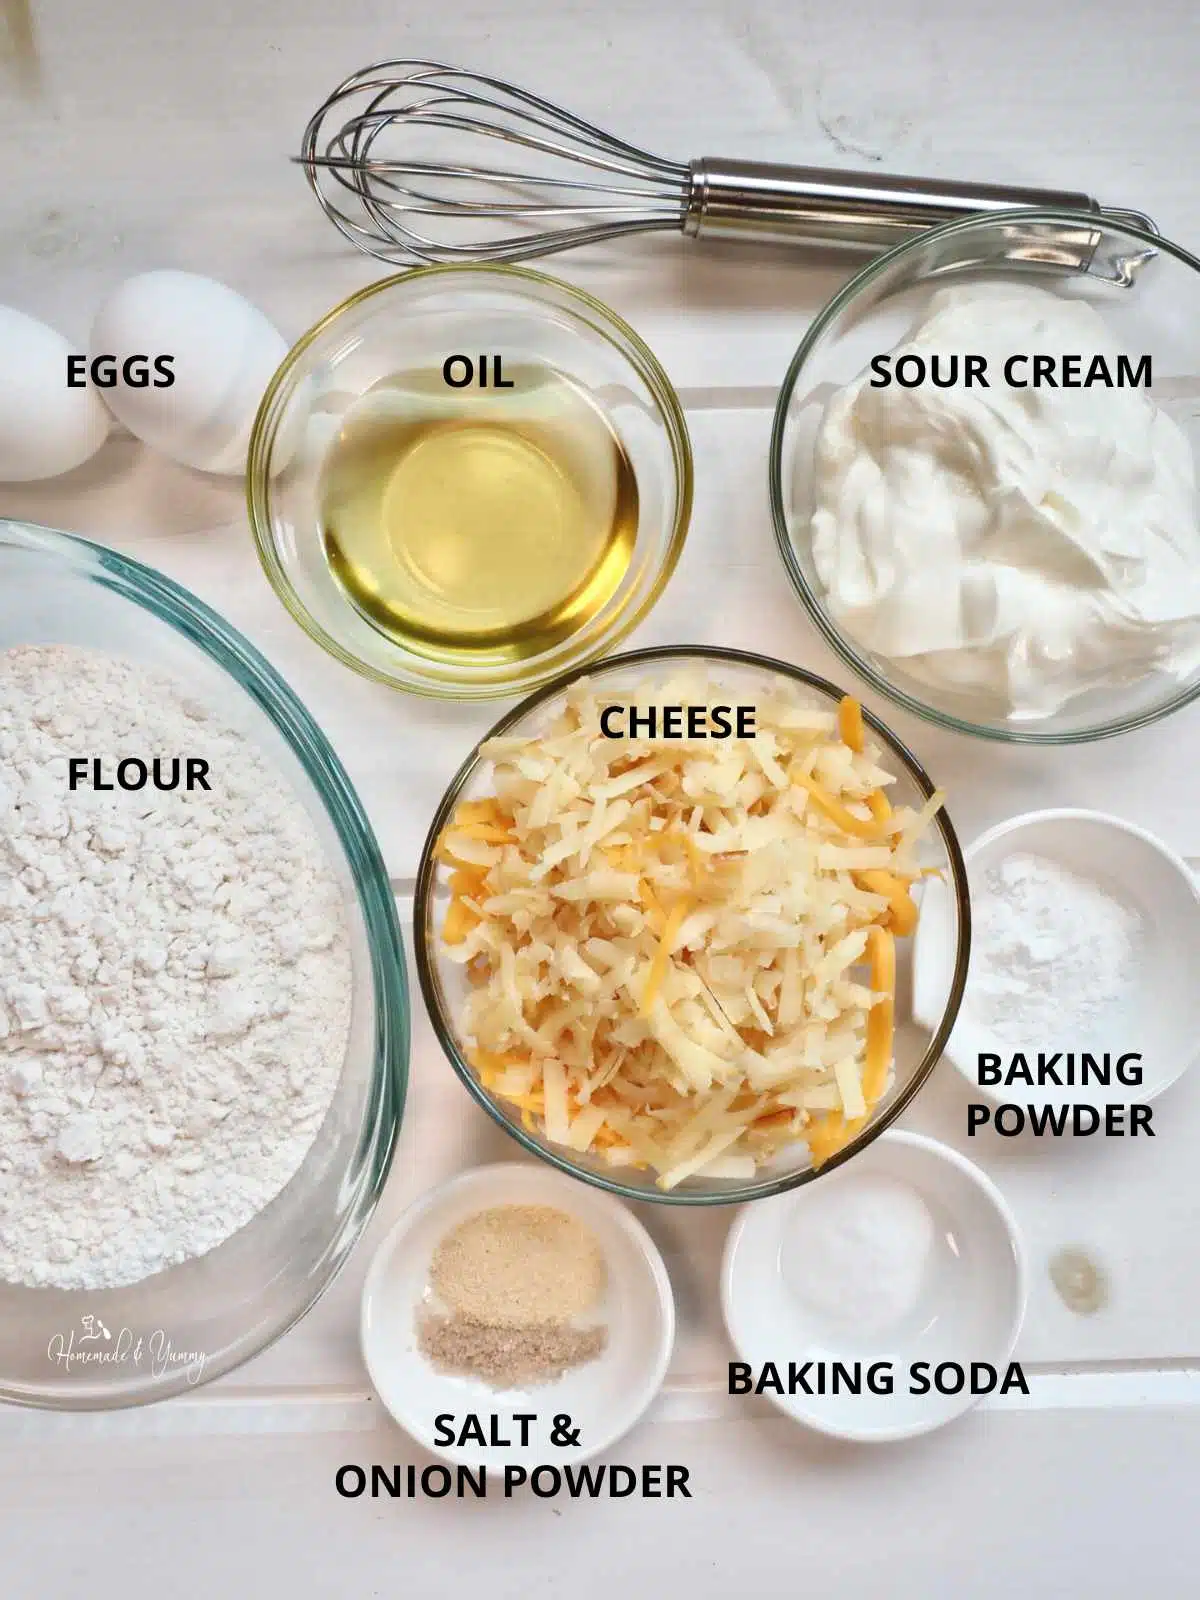 All the ingredients to make homemade cheese muffins.